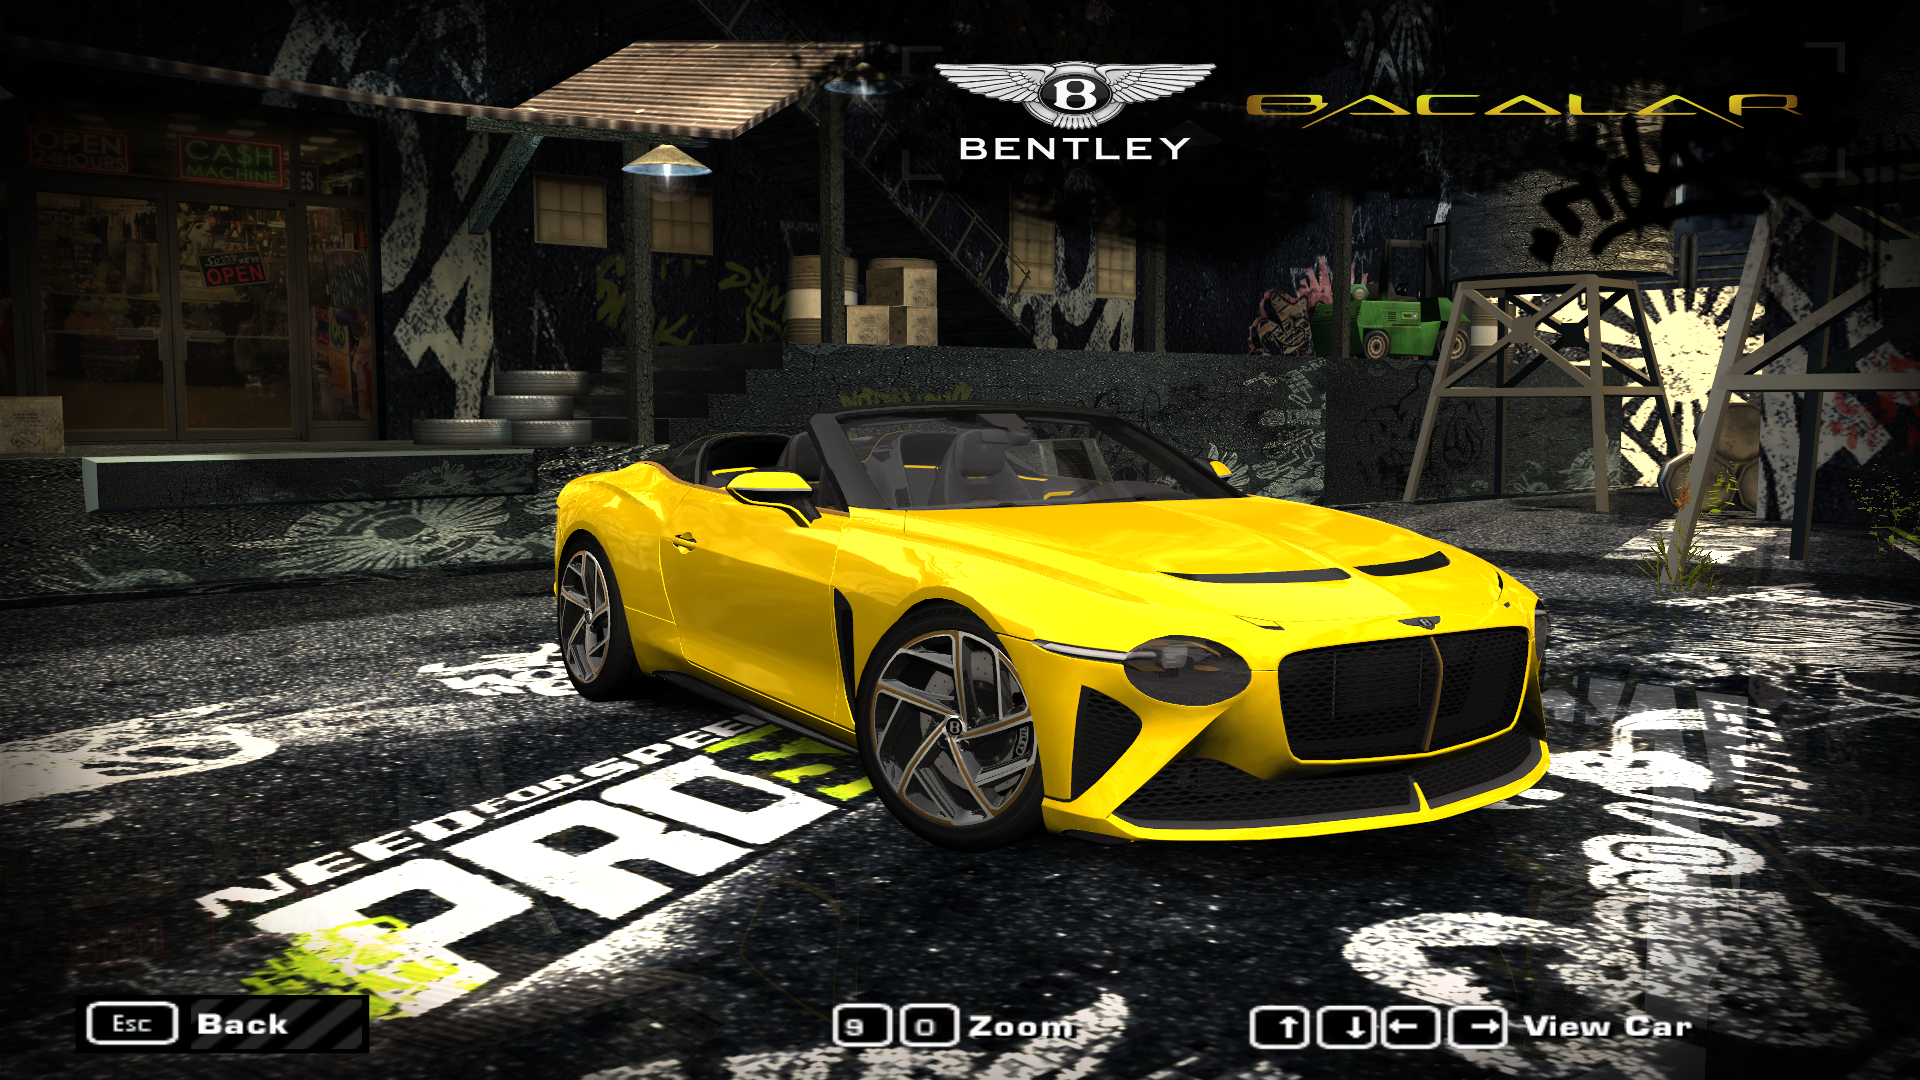 Need For Speed Most Wanted 2021 Bentley Mulliner Bacalar